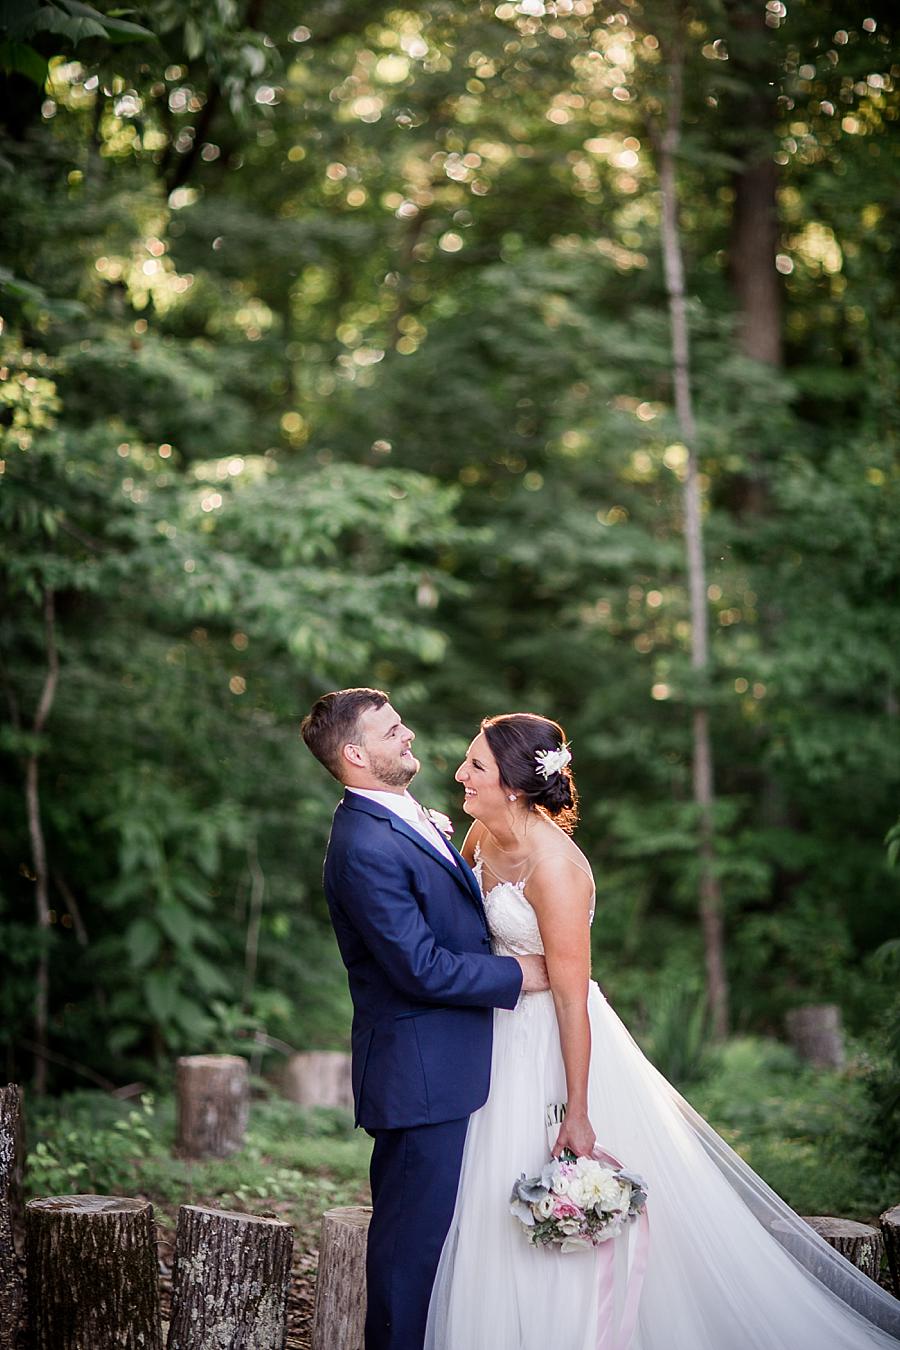 Laughing together at this Estate of Grace Wedding by Knoxville Wedding Photographer, Amanda May Photos.